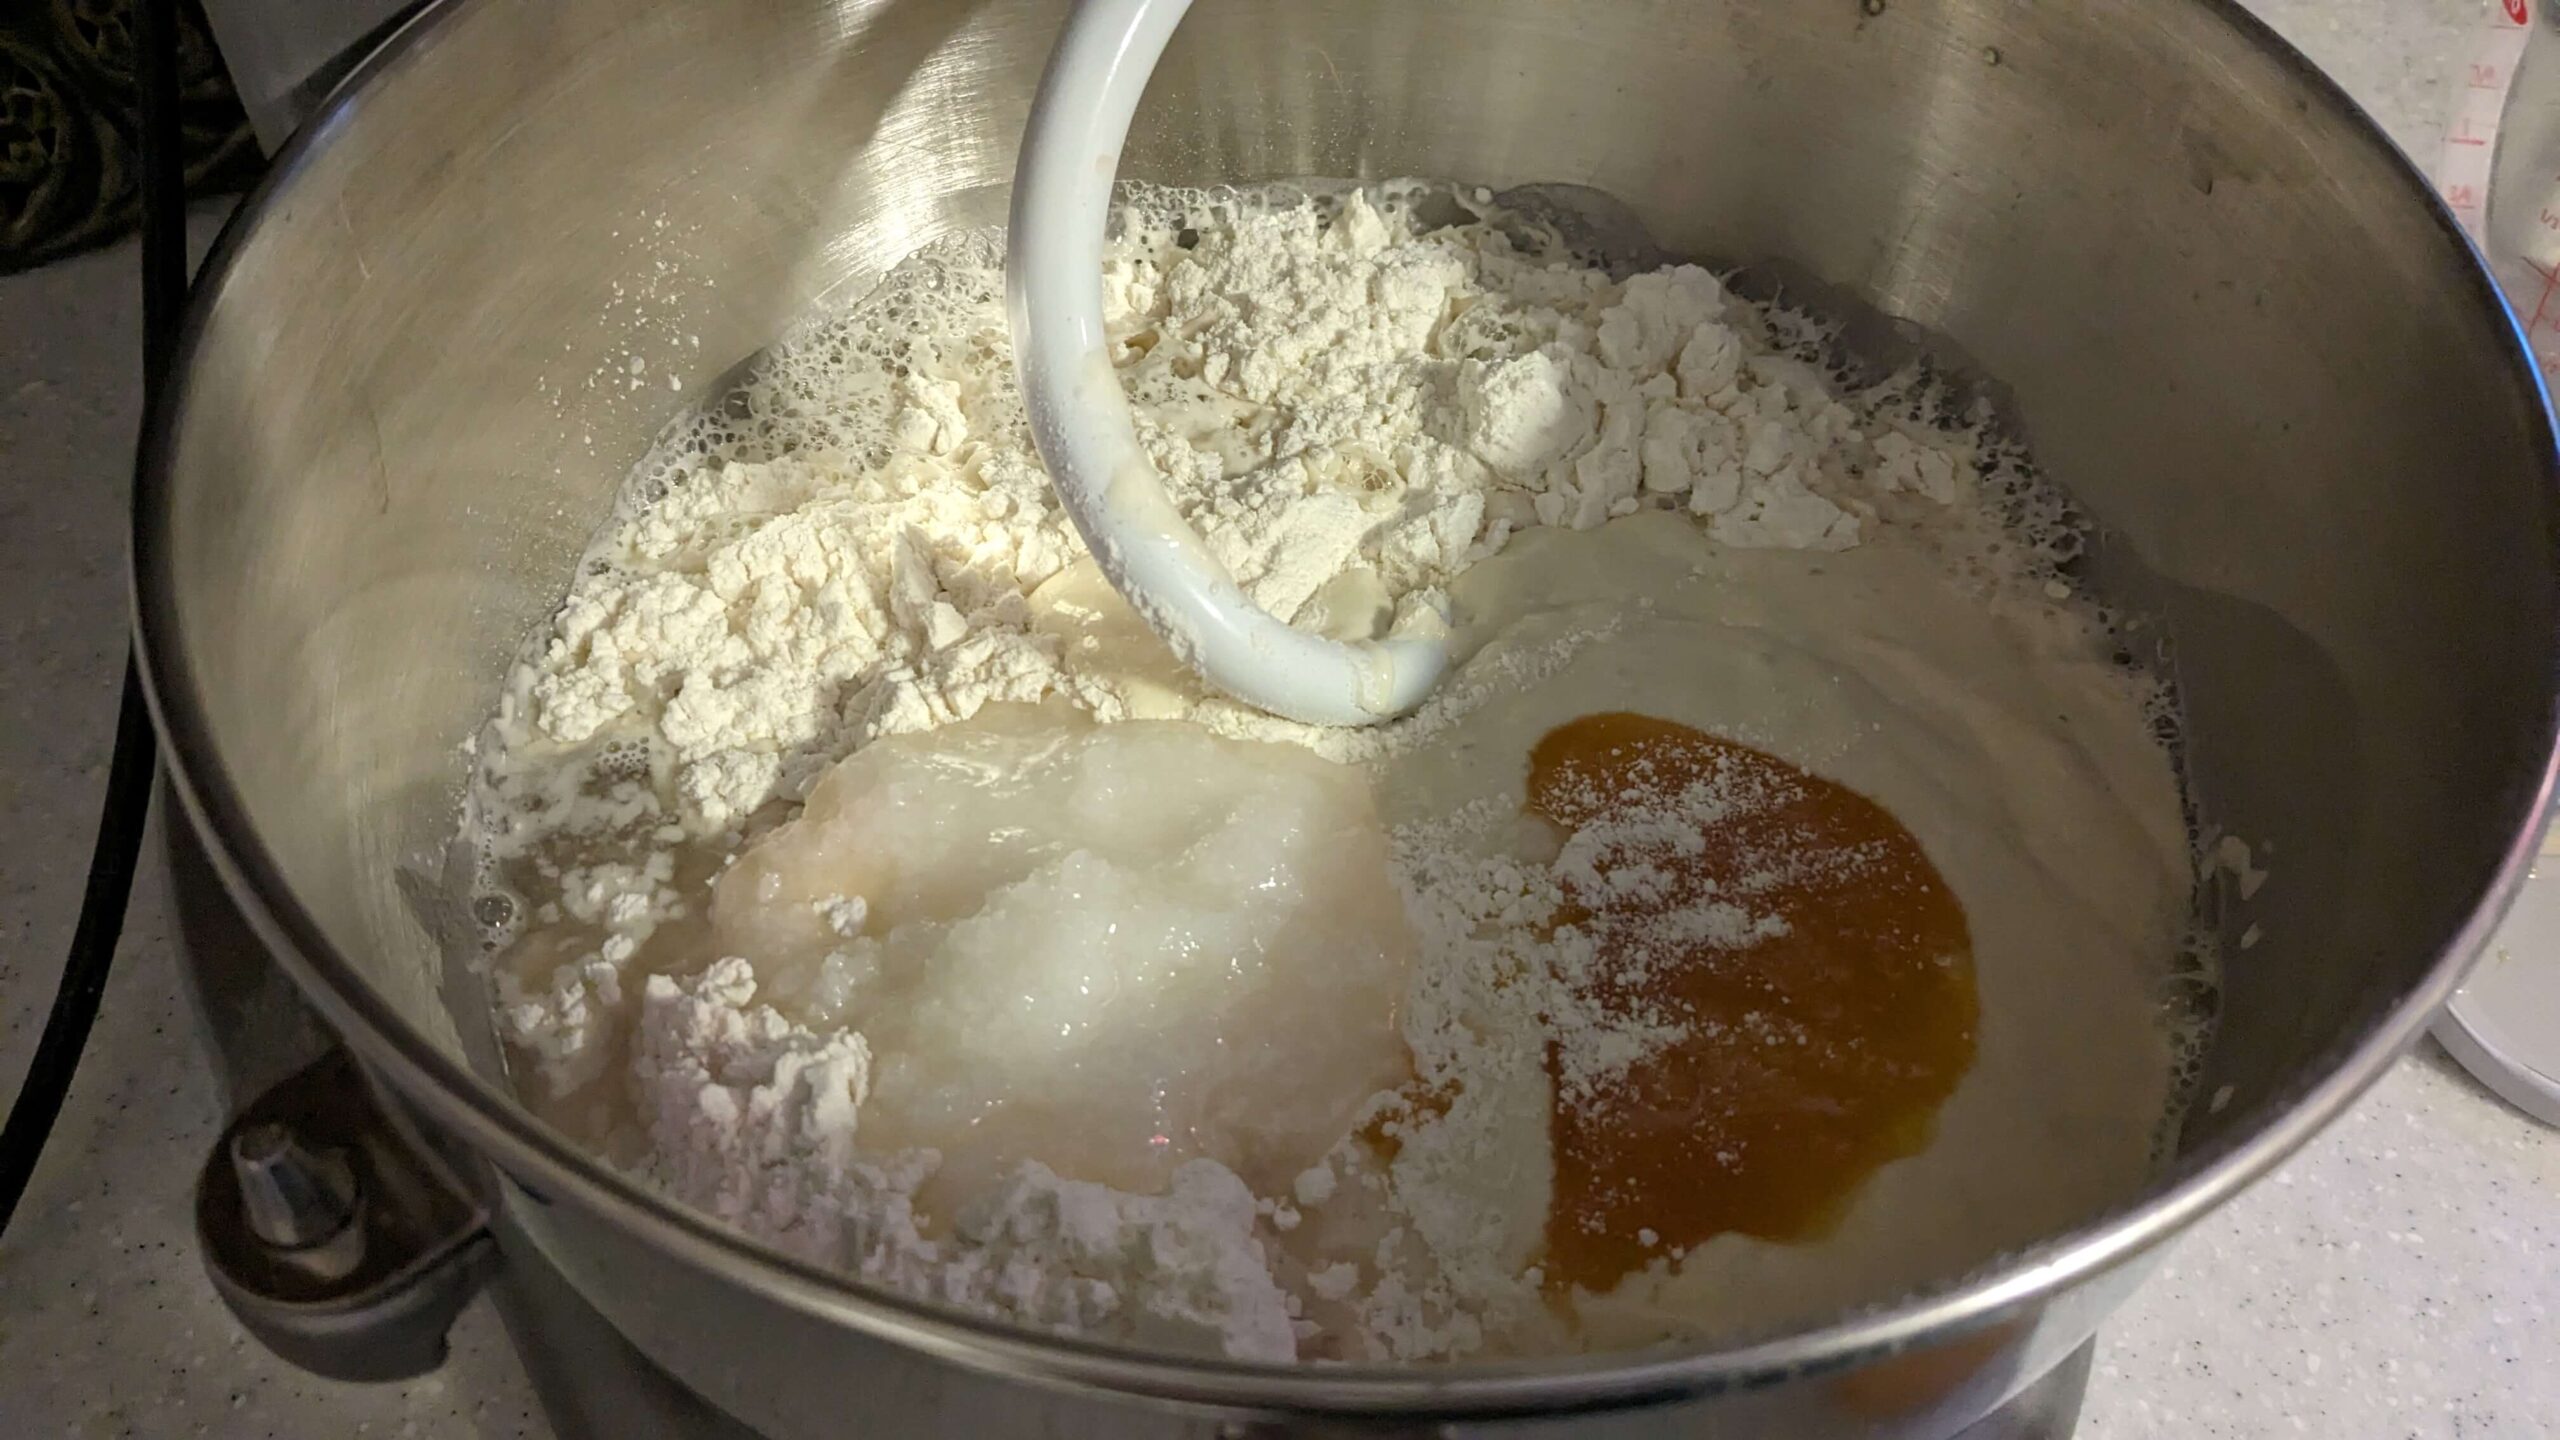 coconut oil, honey and sourdough starter in a wet dough mixture in the bowl of a kitchen aid mixer with a dough hook